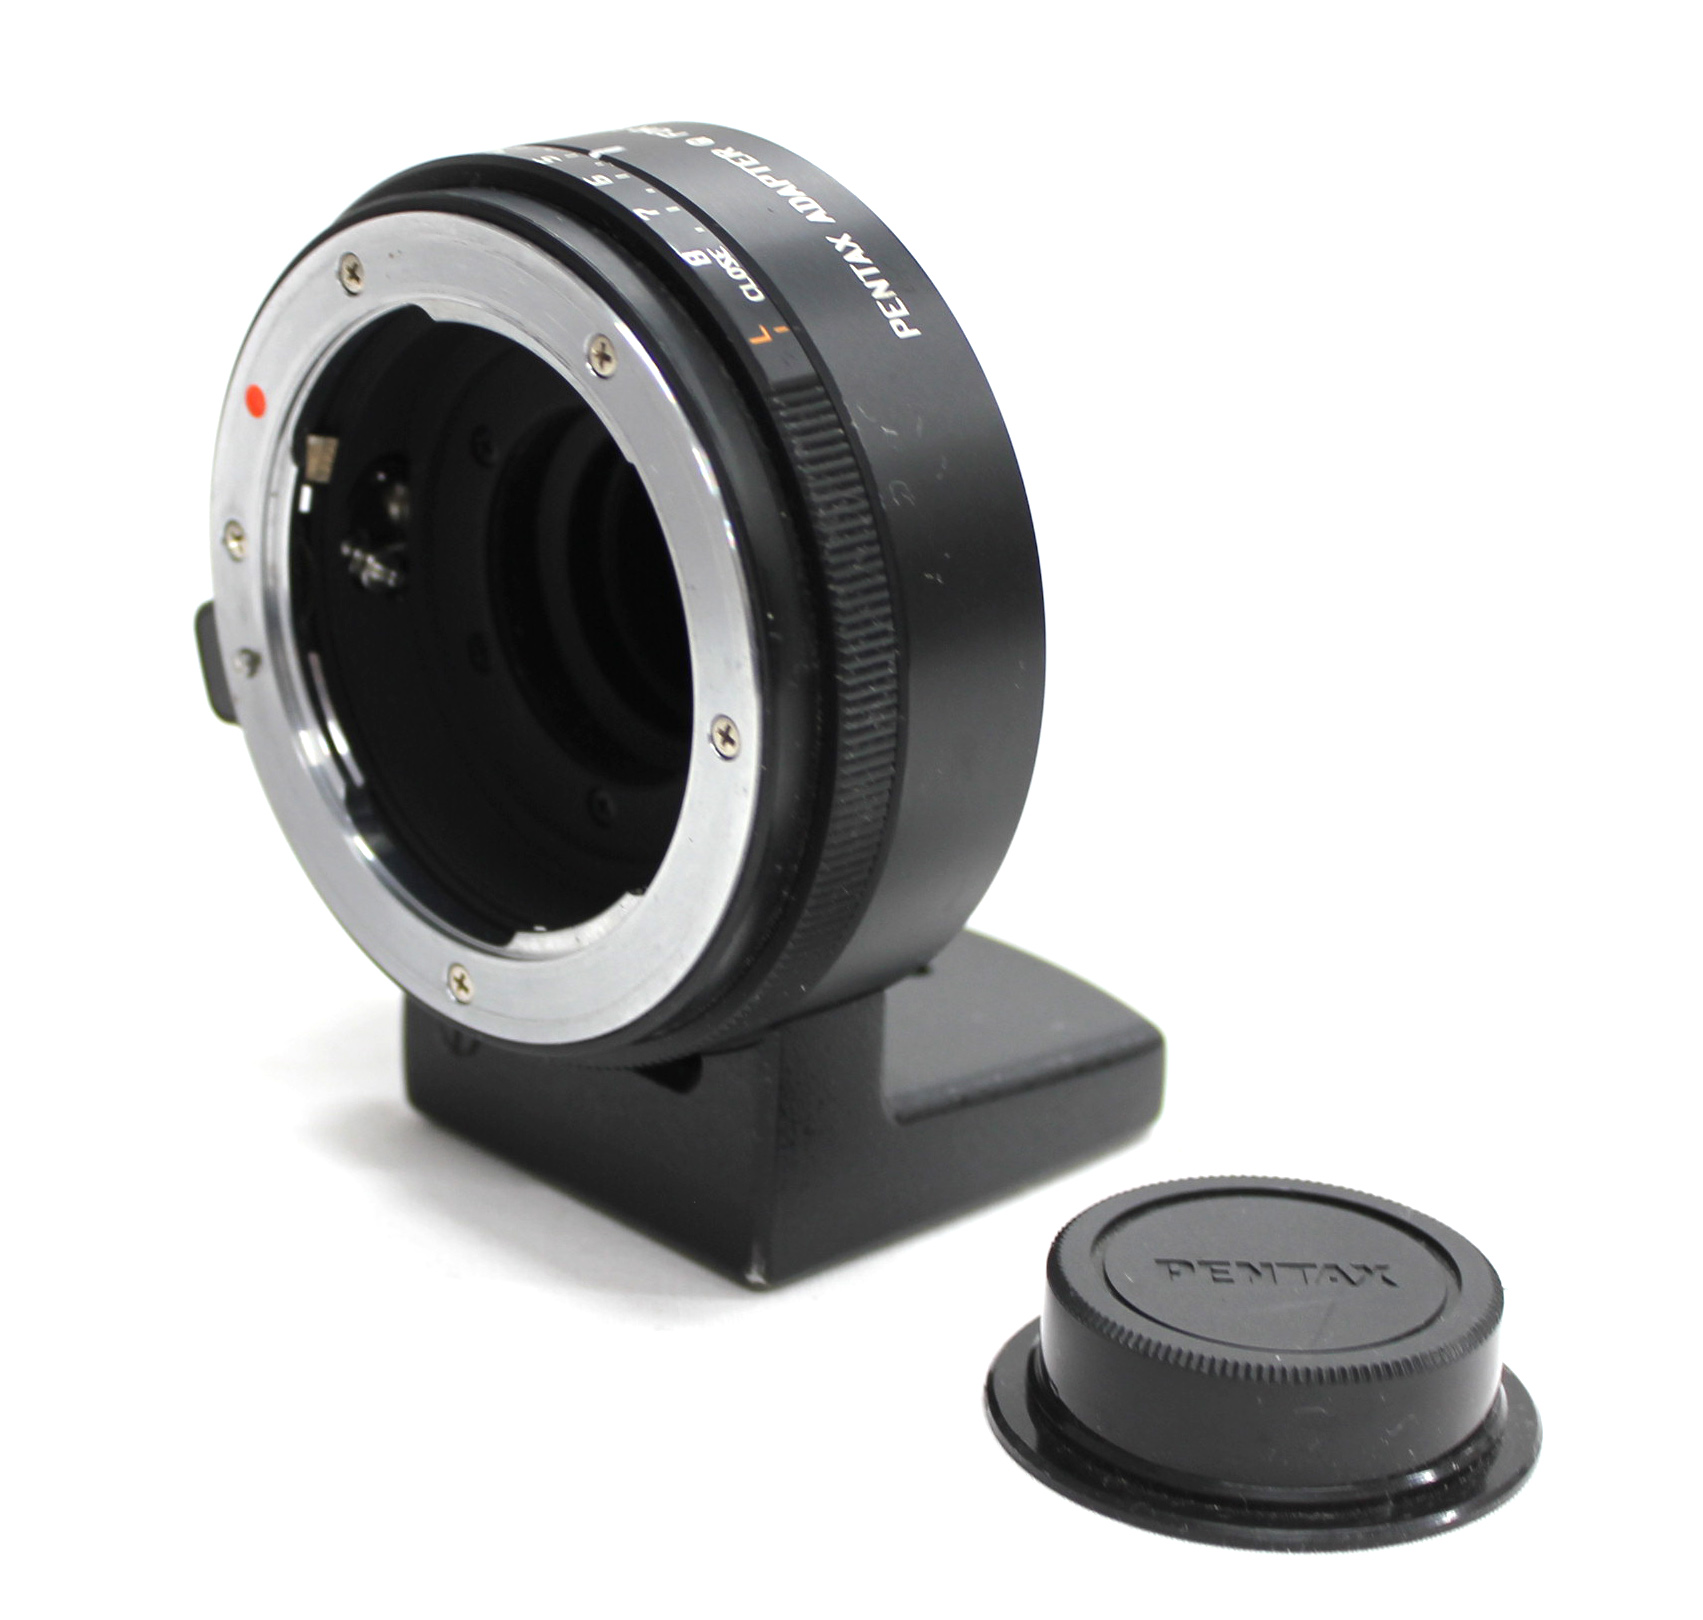 [Excellent+++++] Pentax Adapter Q for K Mount Lens for Q10 Q7 from Japan